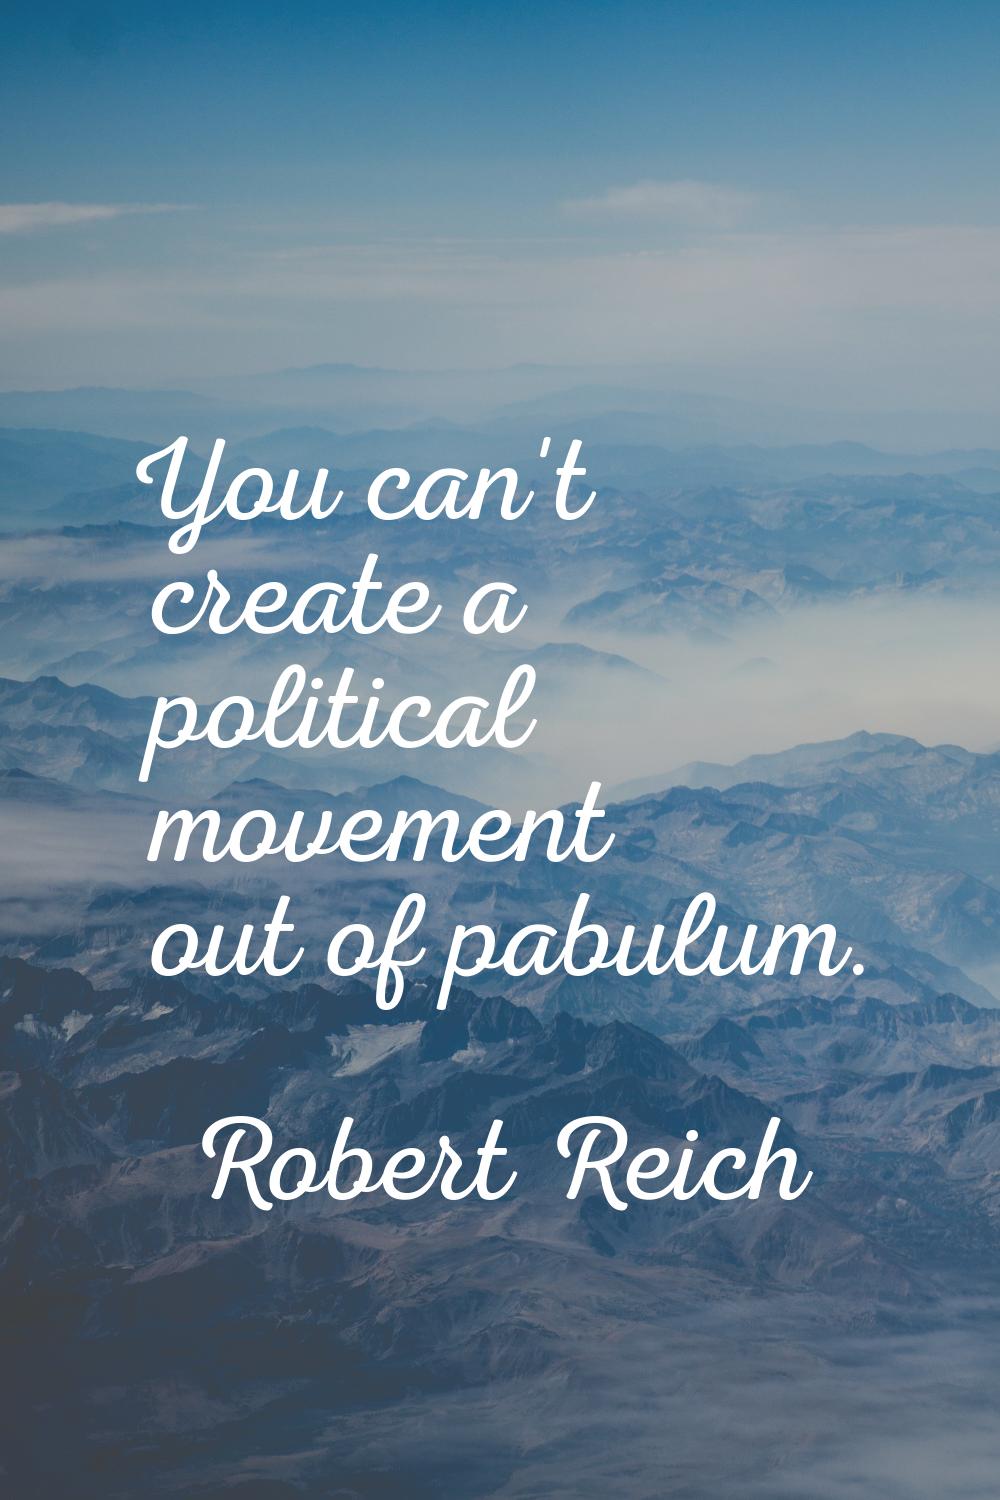 You can't create a political movement out of pabulum.